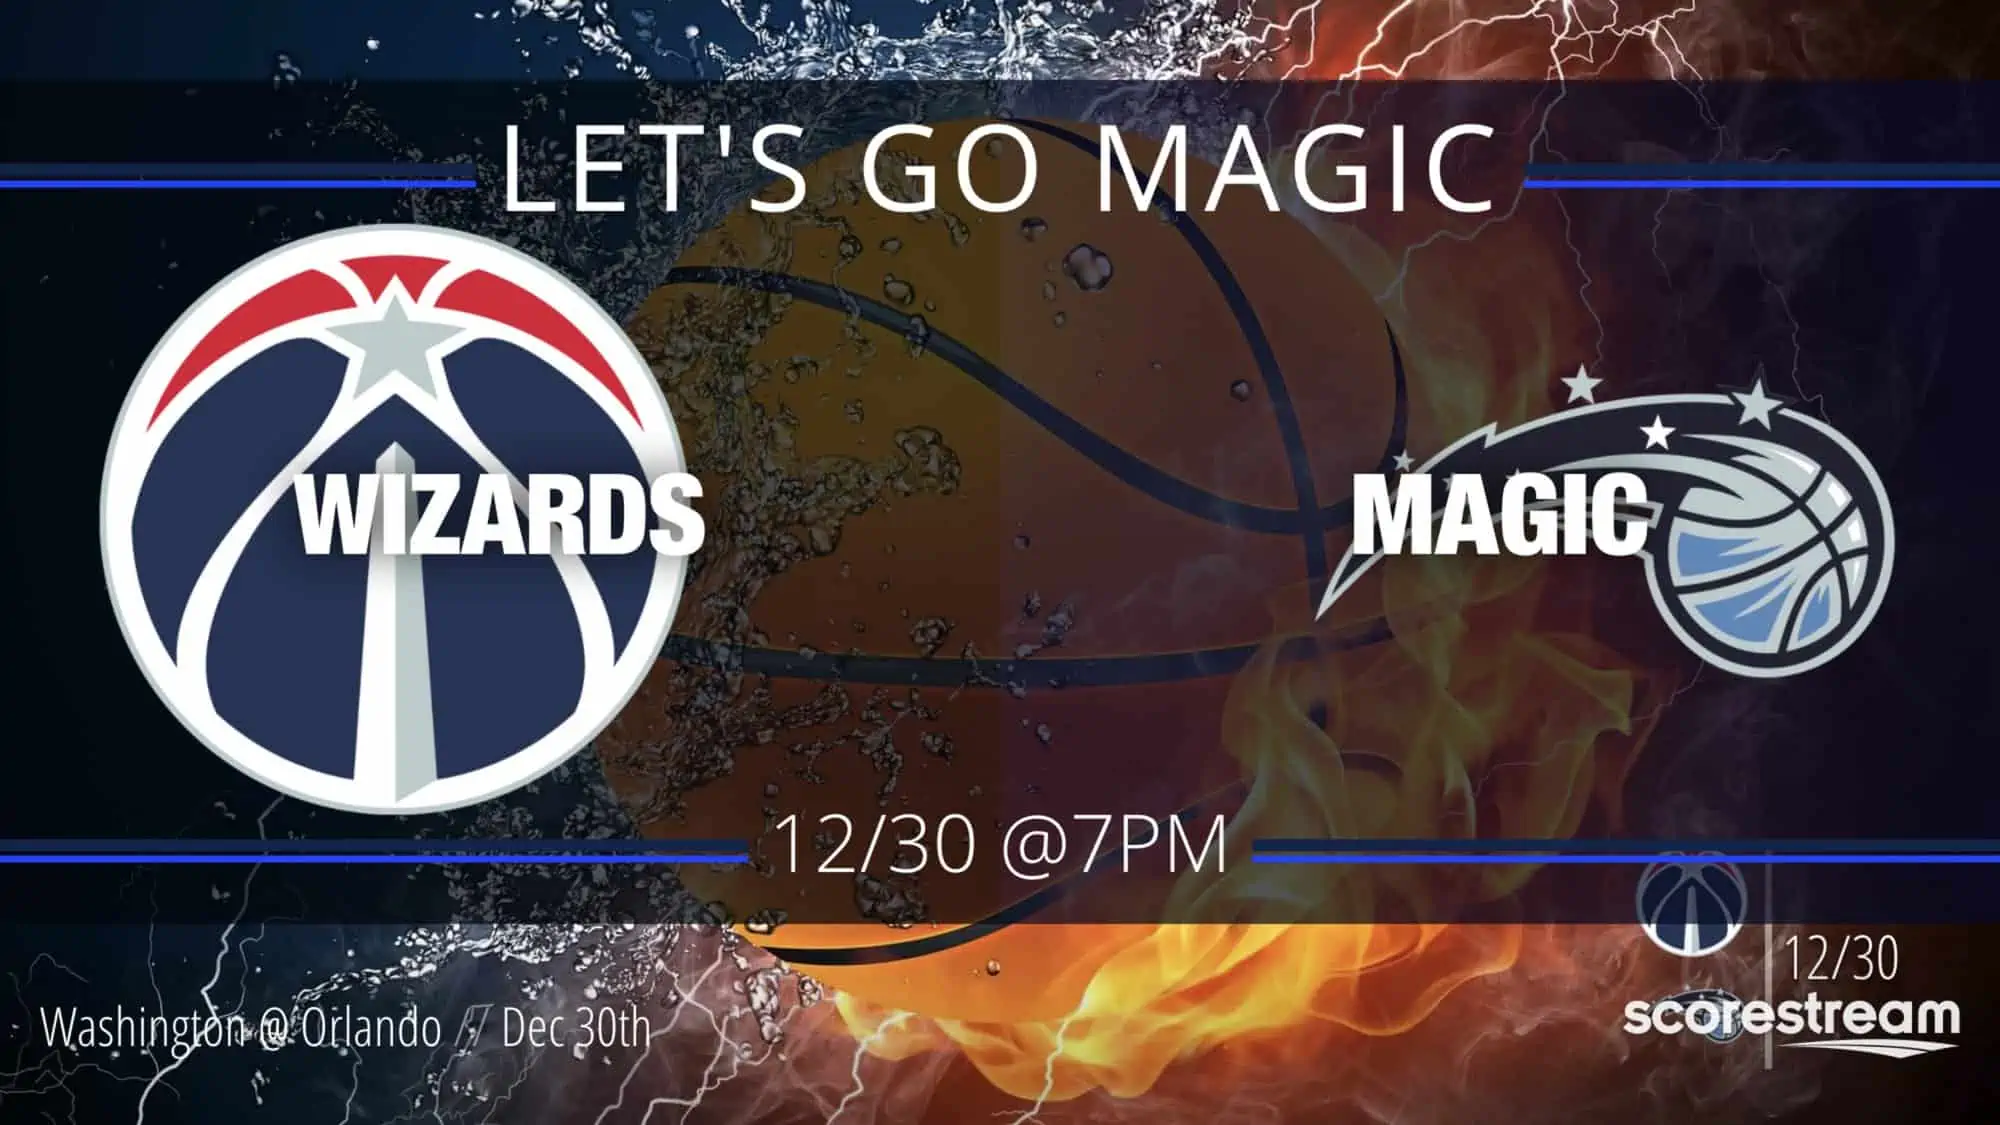 Paolo Banchero and the Magic aim to snap skid vs Wizards tonight – Preview